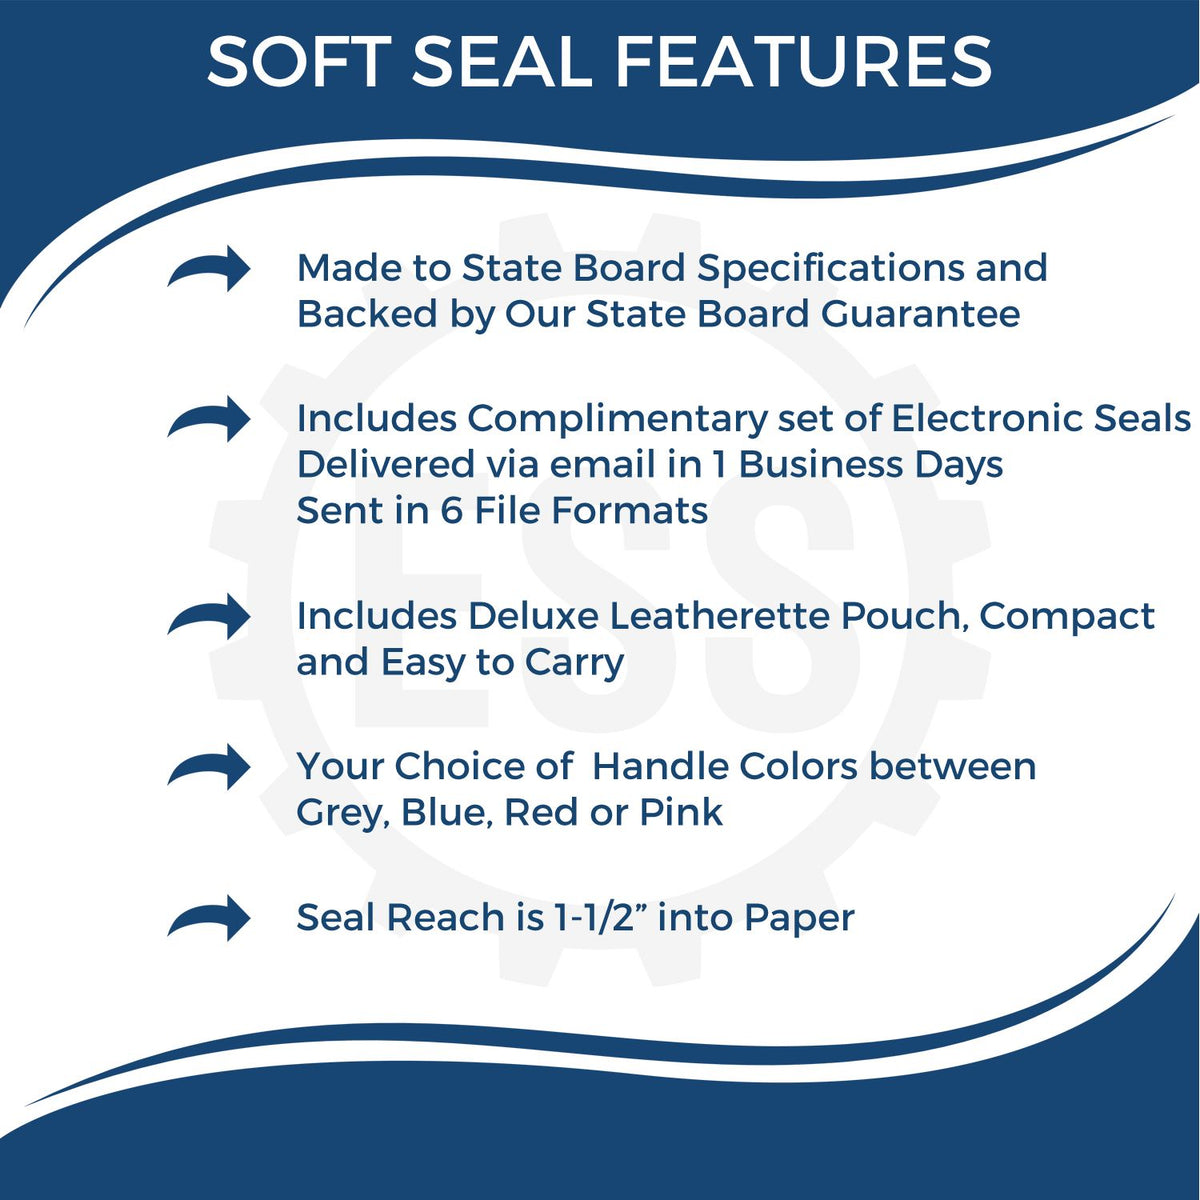 A picture of an infographic highlighting the selling points for the Soft Kentucky Professional Geologist Seal